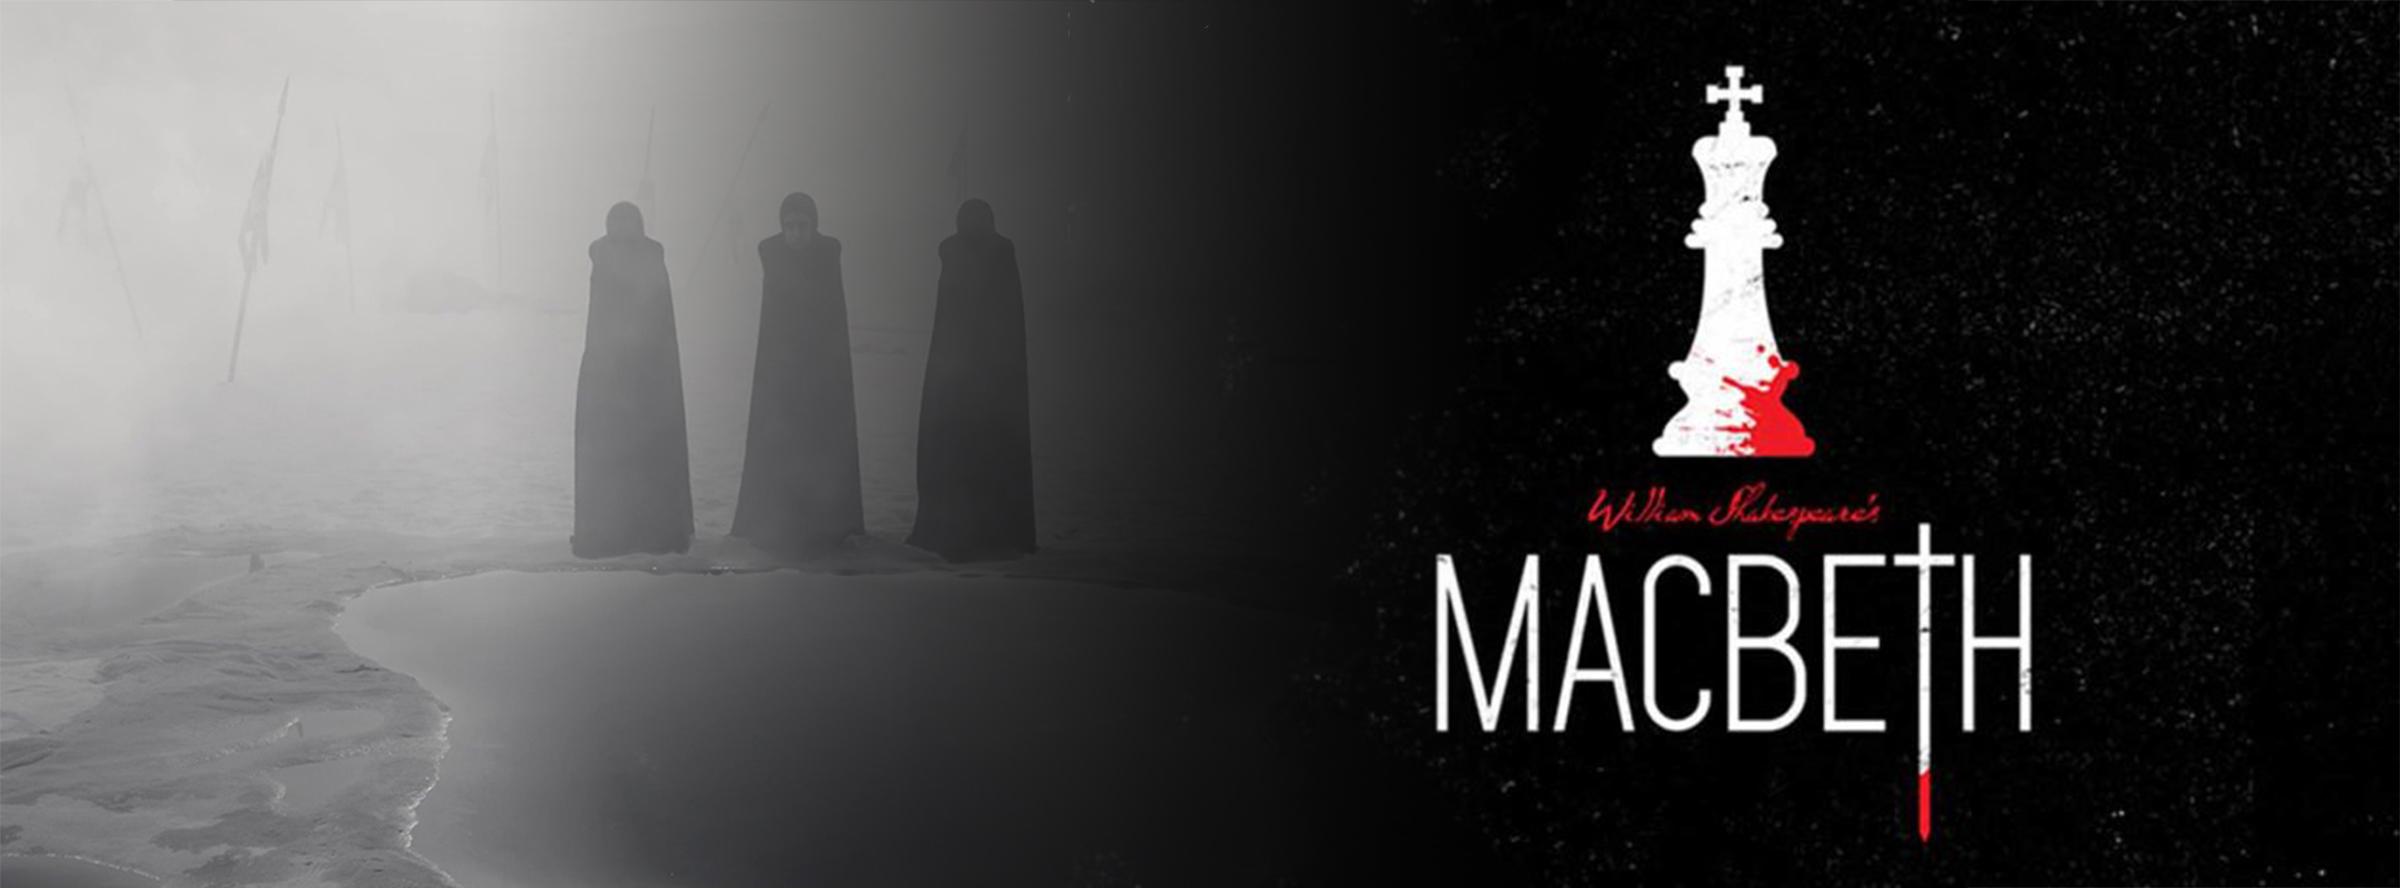 Slider Image for The Tragedy of Macbeth